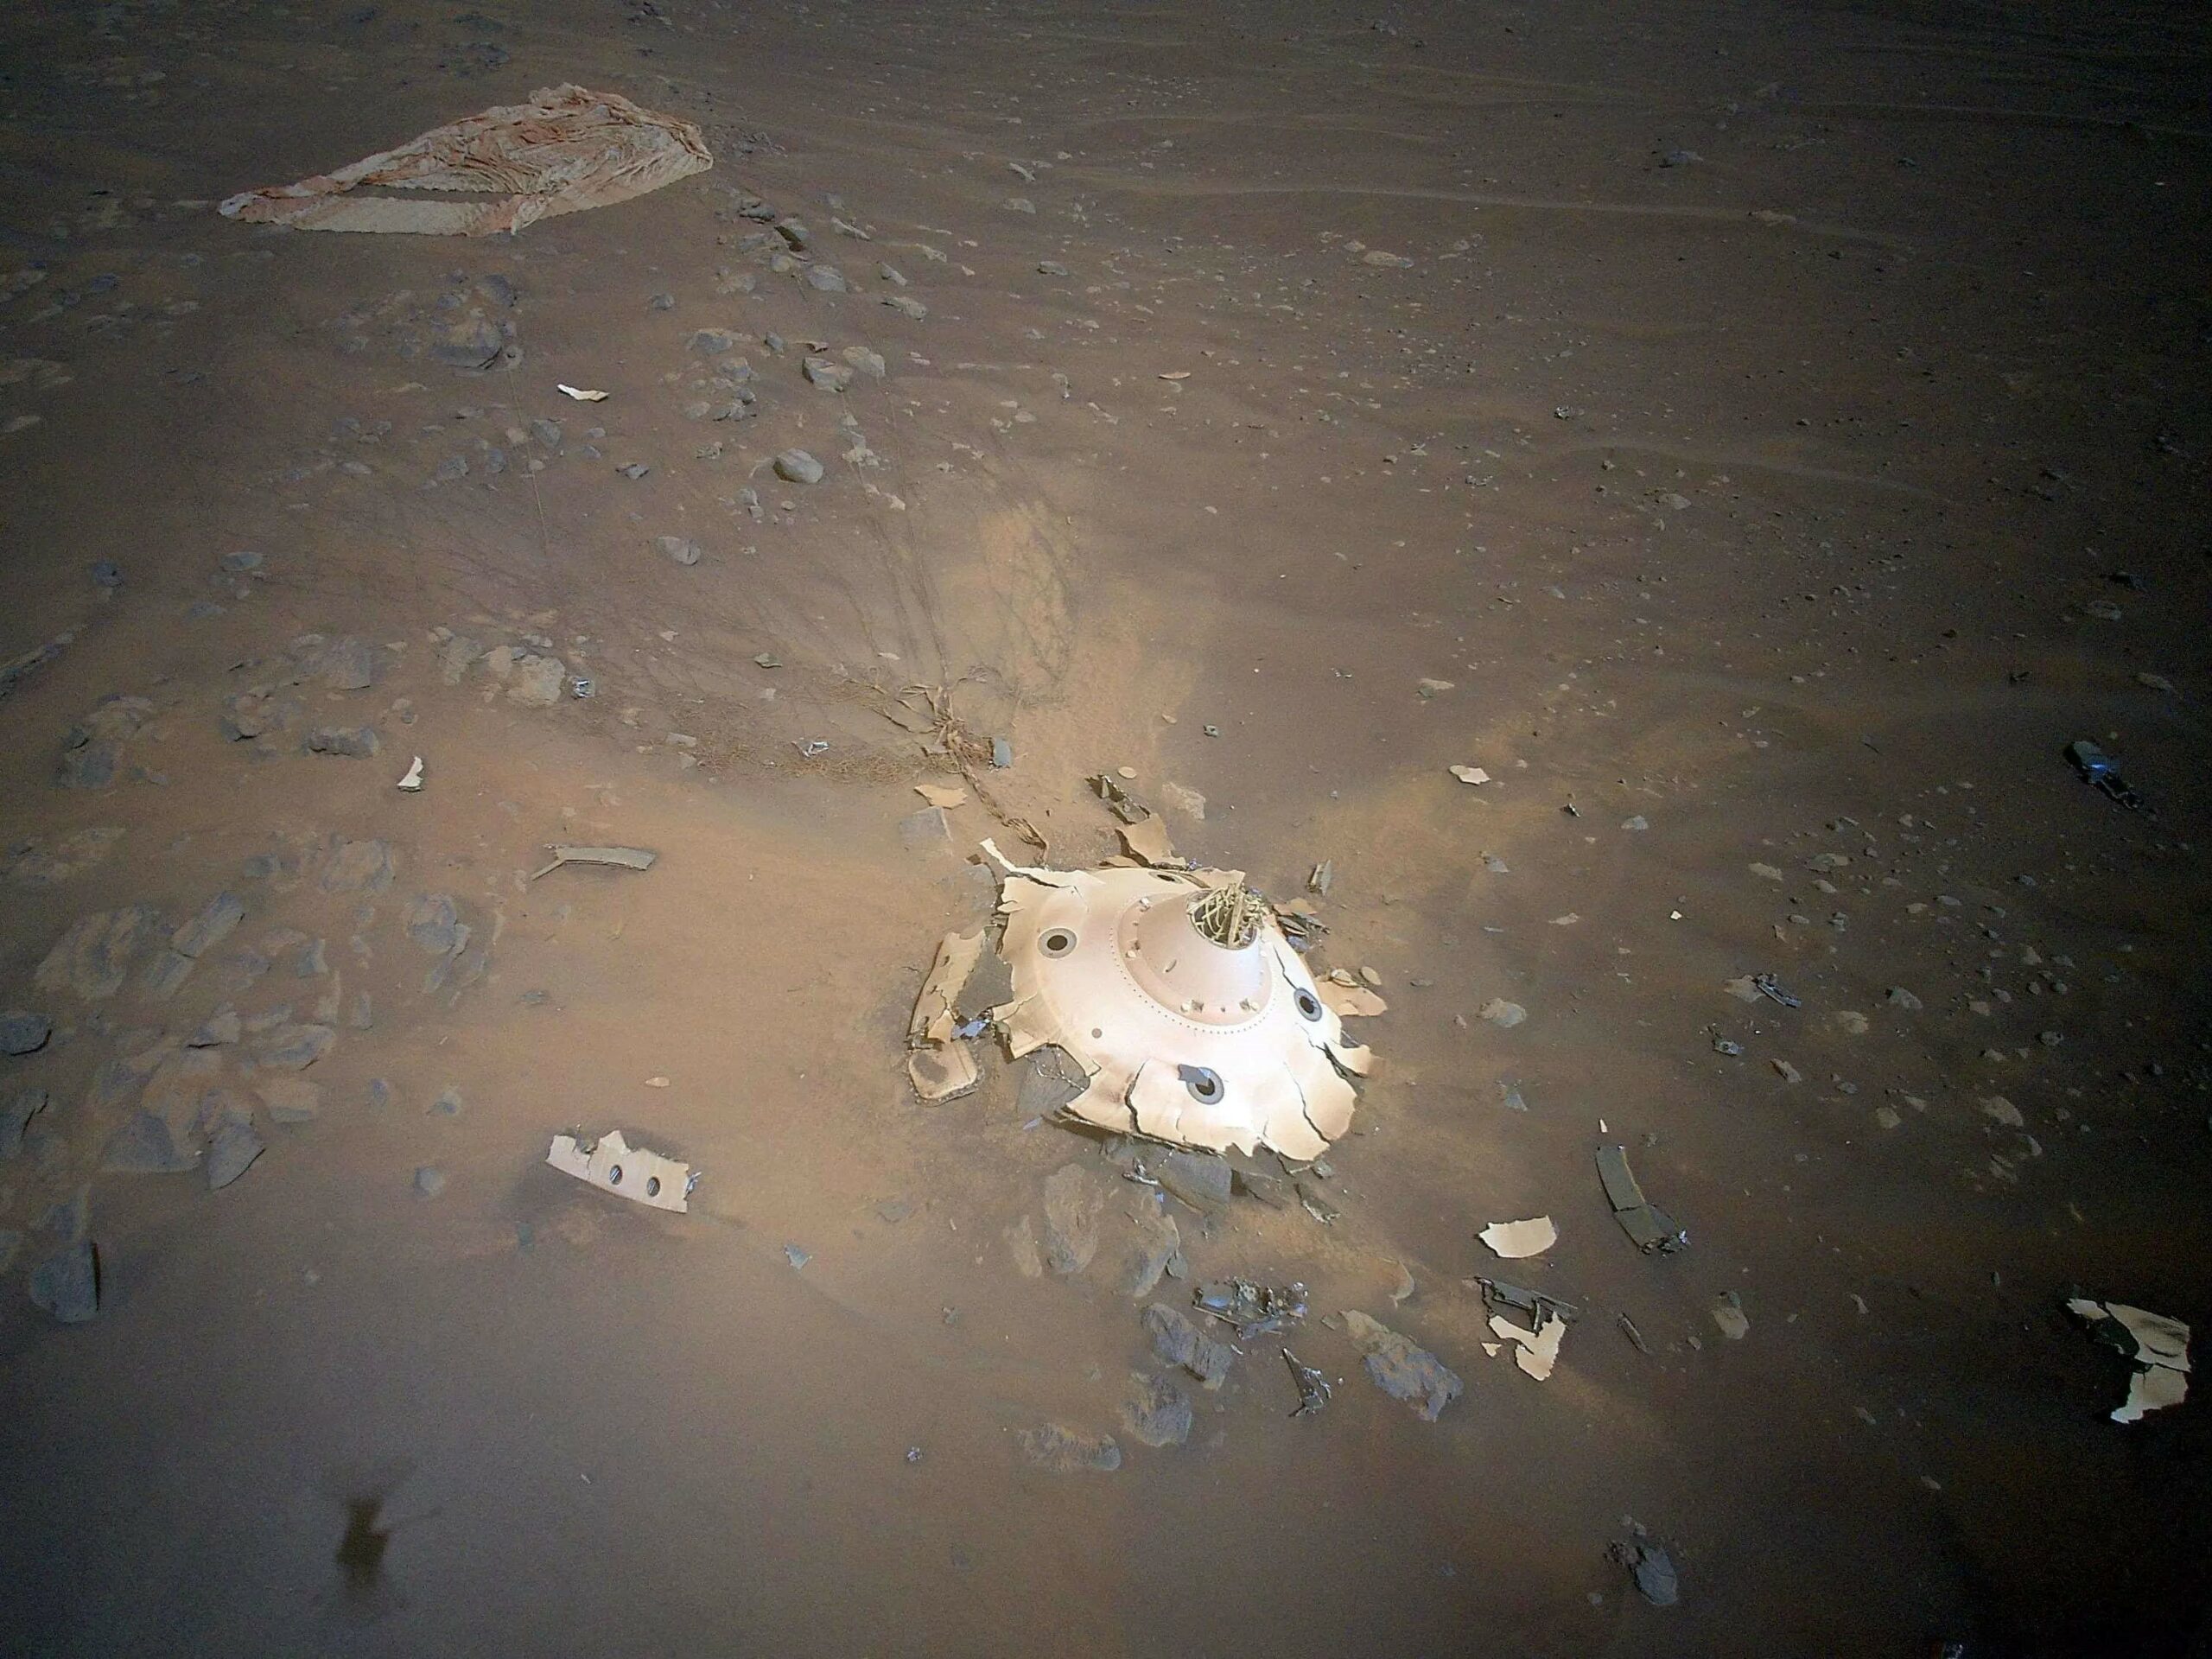 A NASA helicopter photographed the remains of a rover that landed on Mars. This is another example of how humans are polluting the other world.